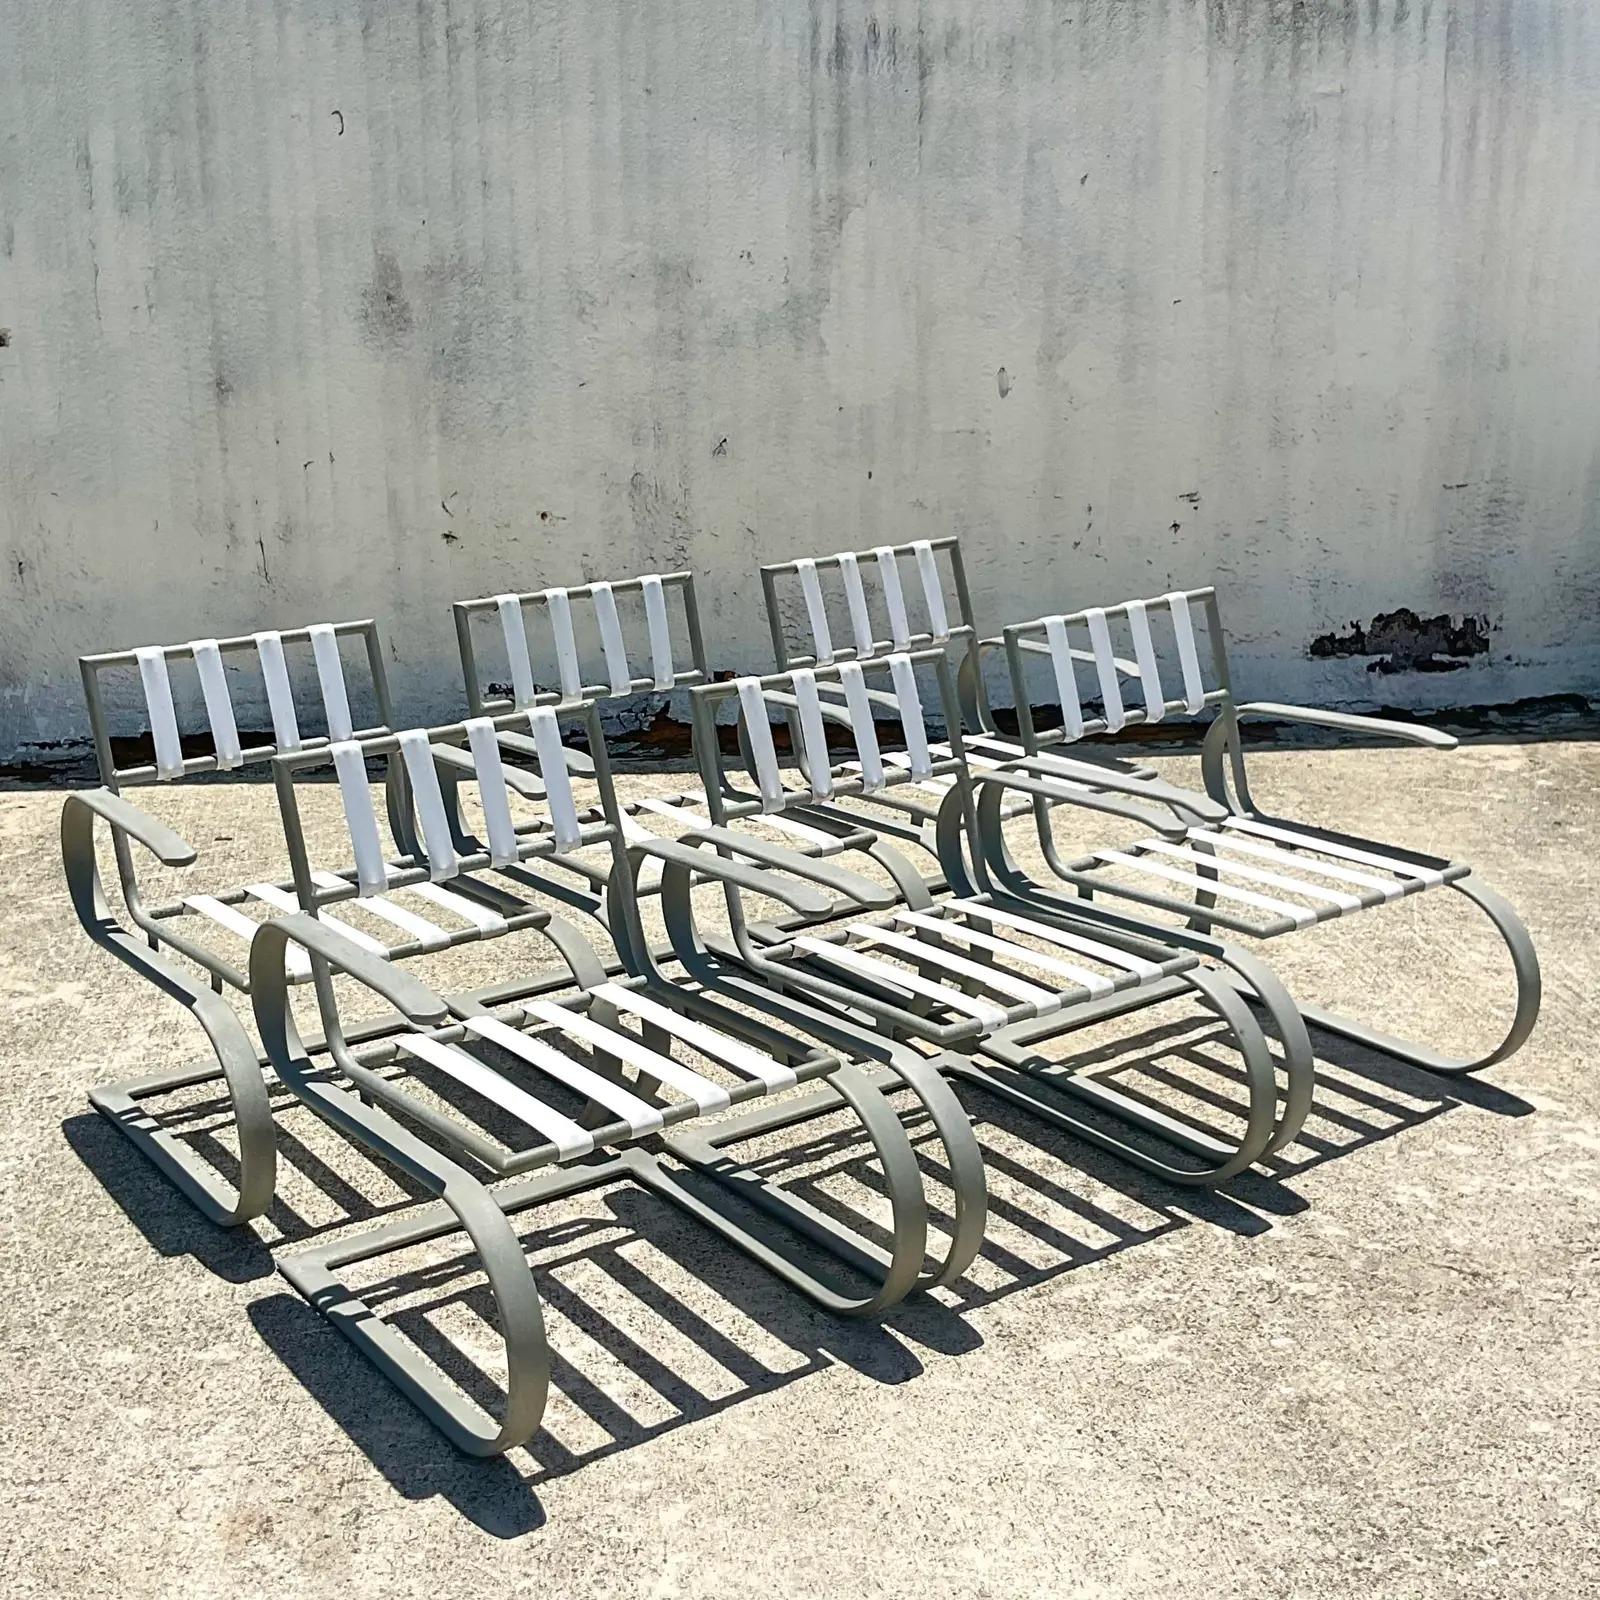 Fantastic set of 6 vintage 1960s Midcentury outdoor dining chairs. Designed by the legendary Burt Baker for Tropitone. Revolutionary powder coated aluminum in the original sparkle finish. Sexy Springer shape for maximum comfort and sleek design.